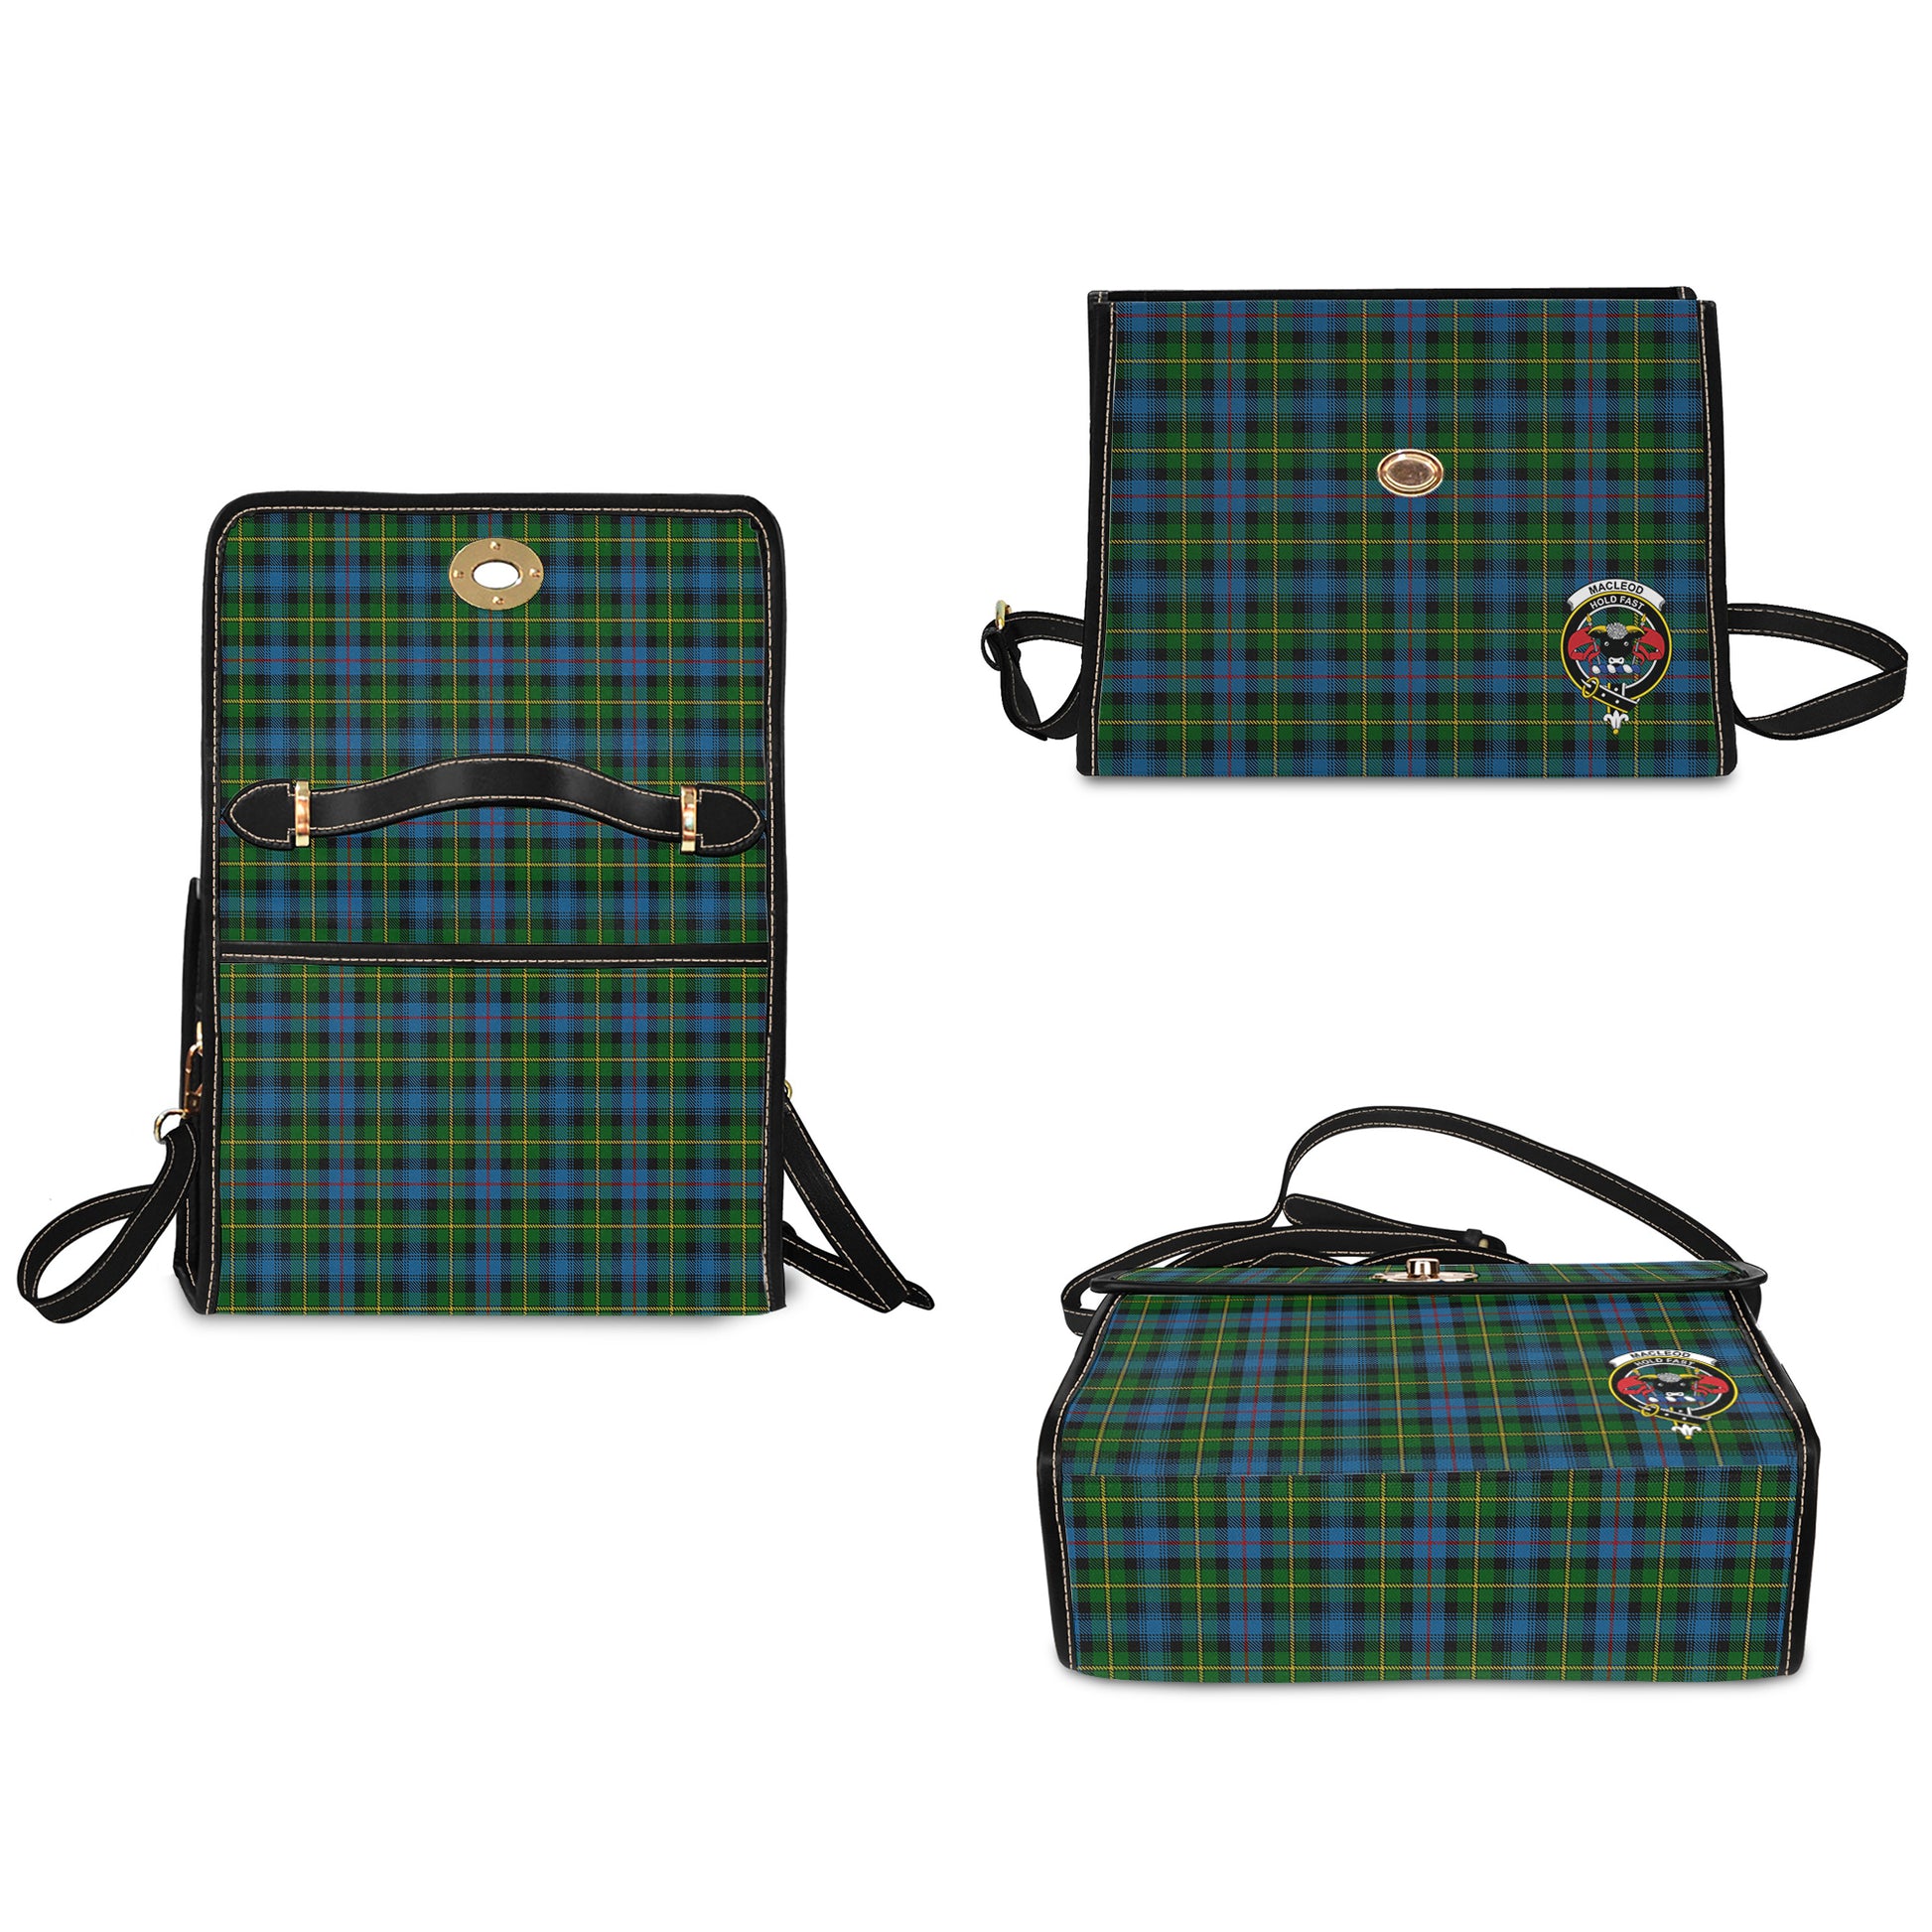 macleod-of-skye-tartan-leather-strap-waterproof-canvas-bag-with-family-crest